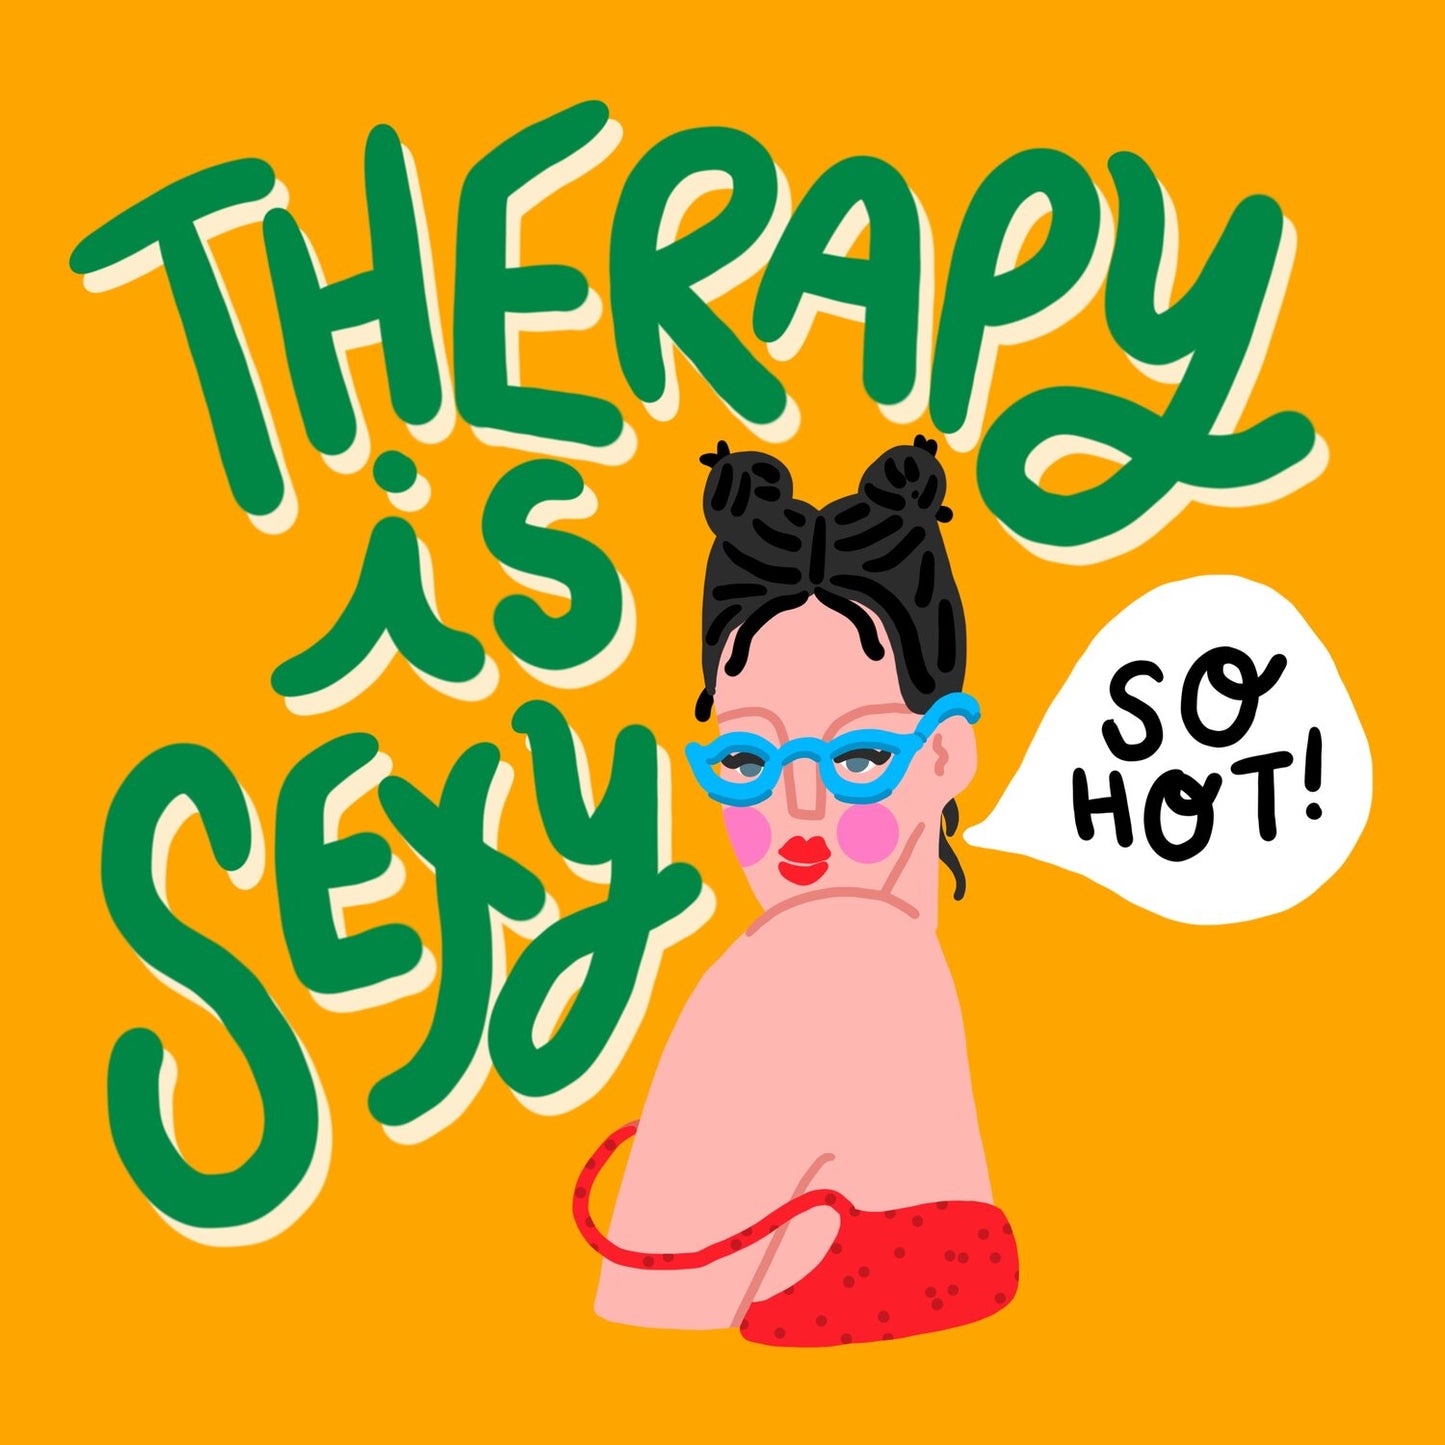 Therapy is Sexy - Print - 8x8"